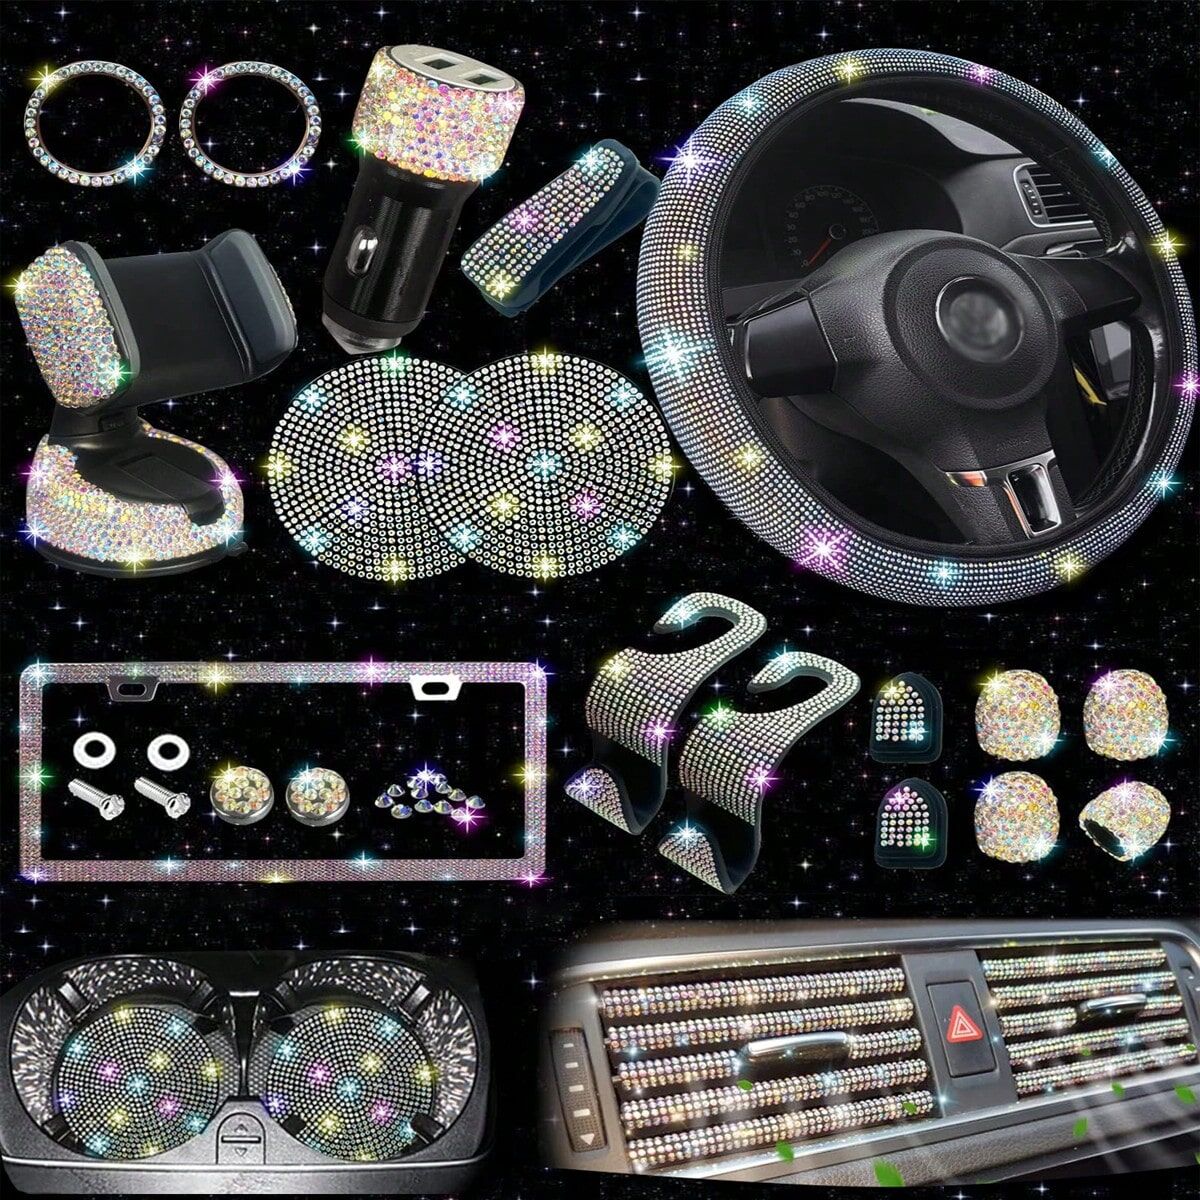 SHEIN 27pcs Women's Bling Car Accessory Kit, You Will Receive: 1 Universal Steering Wheel Cover 15'', 1 Mobile Phone Holder, 1 License Plate Frame, 10 Car Air Vent Decoration, 1 Dual Usb, 2 Car Cup Mat, 2 Multi-Functional Car Seat Back Hook, 1 Glasses Hol